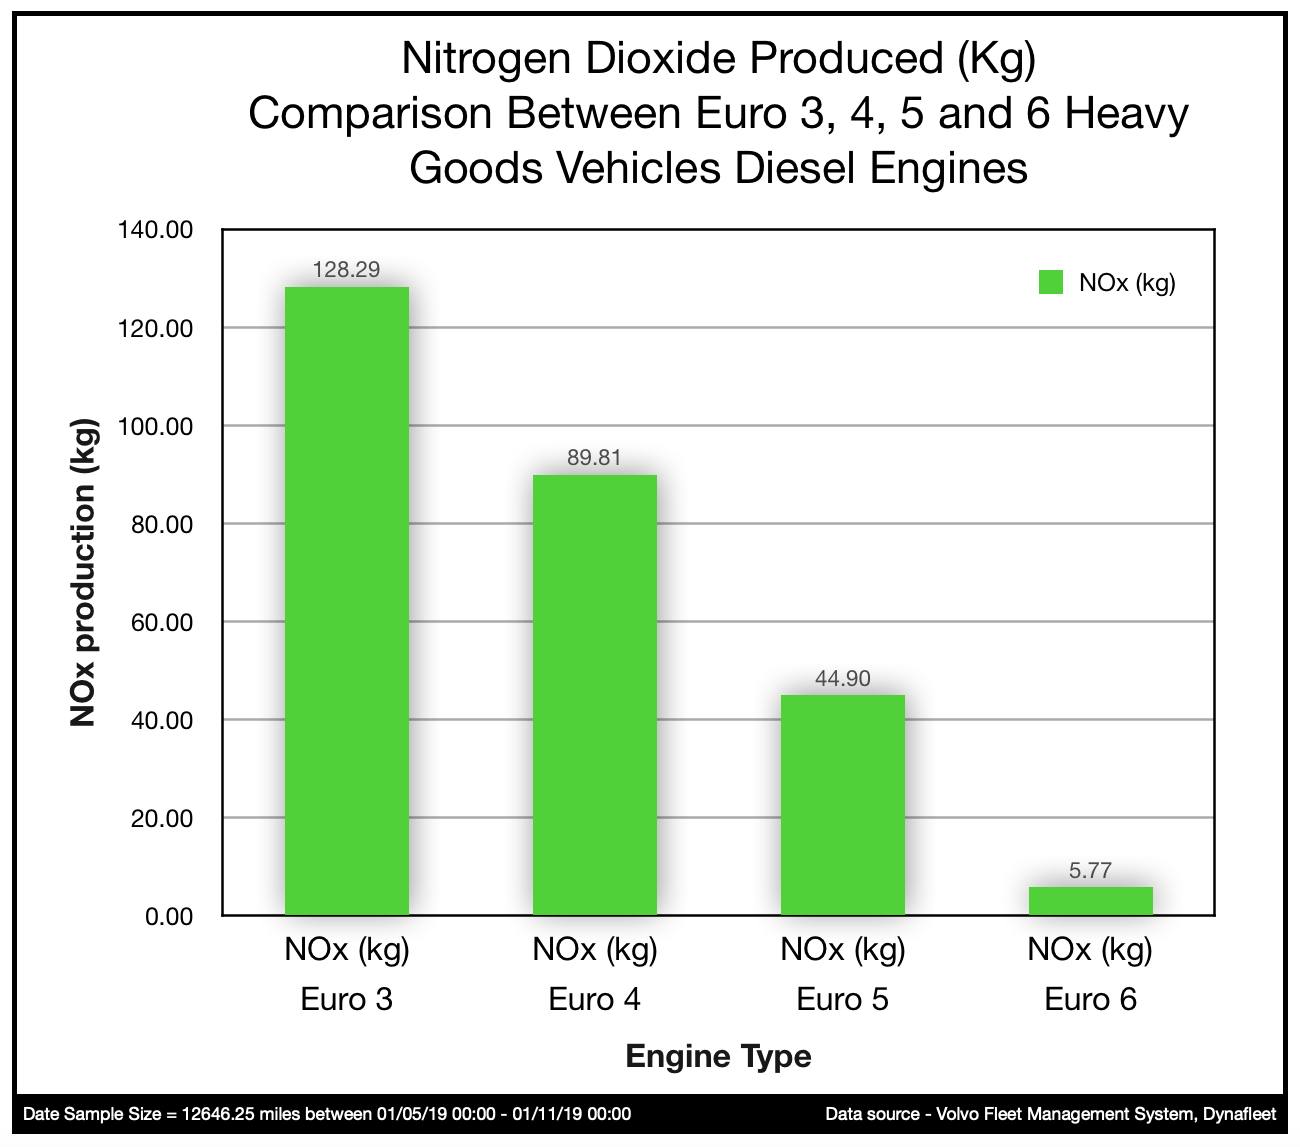 Comparison of NOx produced by Euro 3, Euro 4, Euro 5 and Euro 6 Vehicles